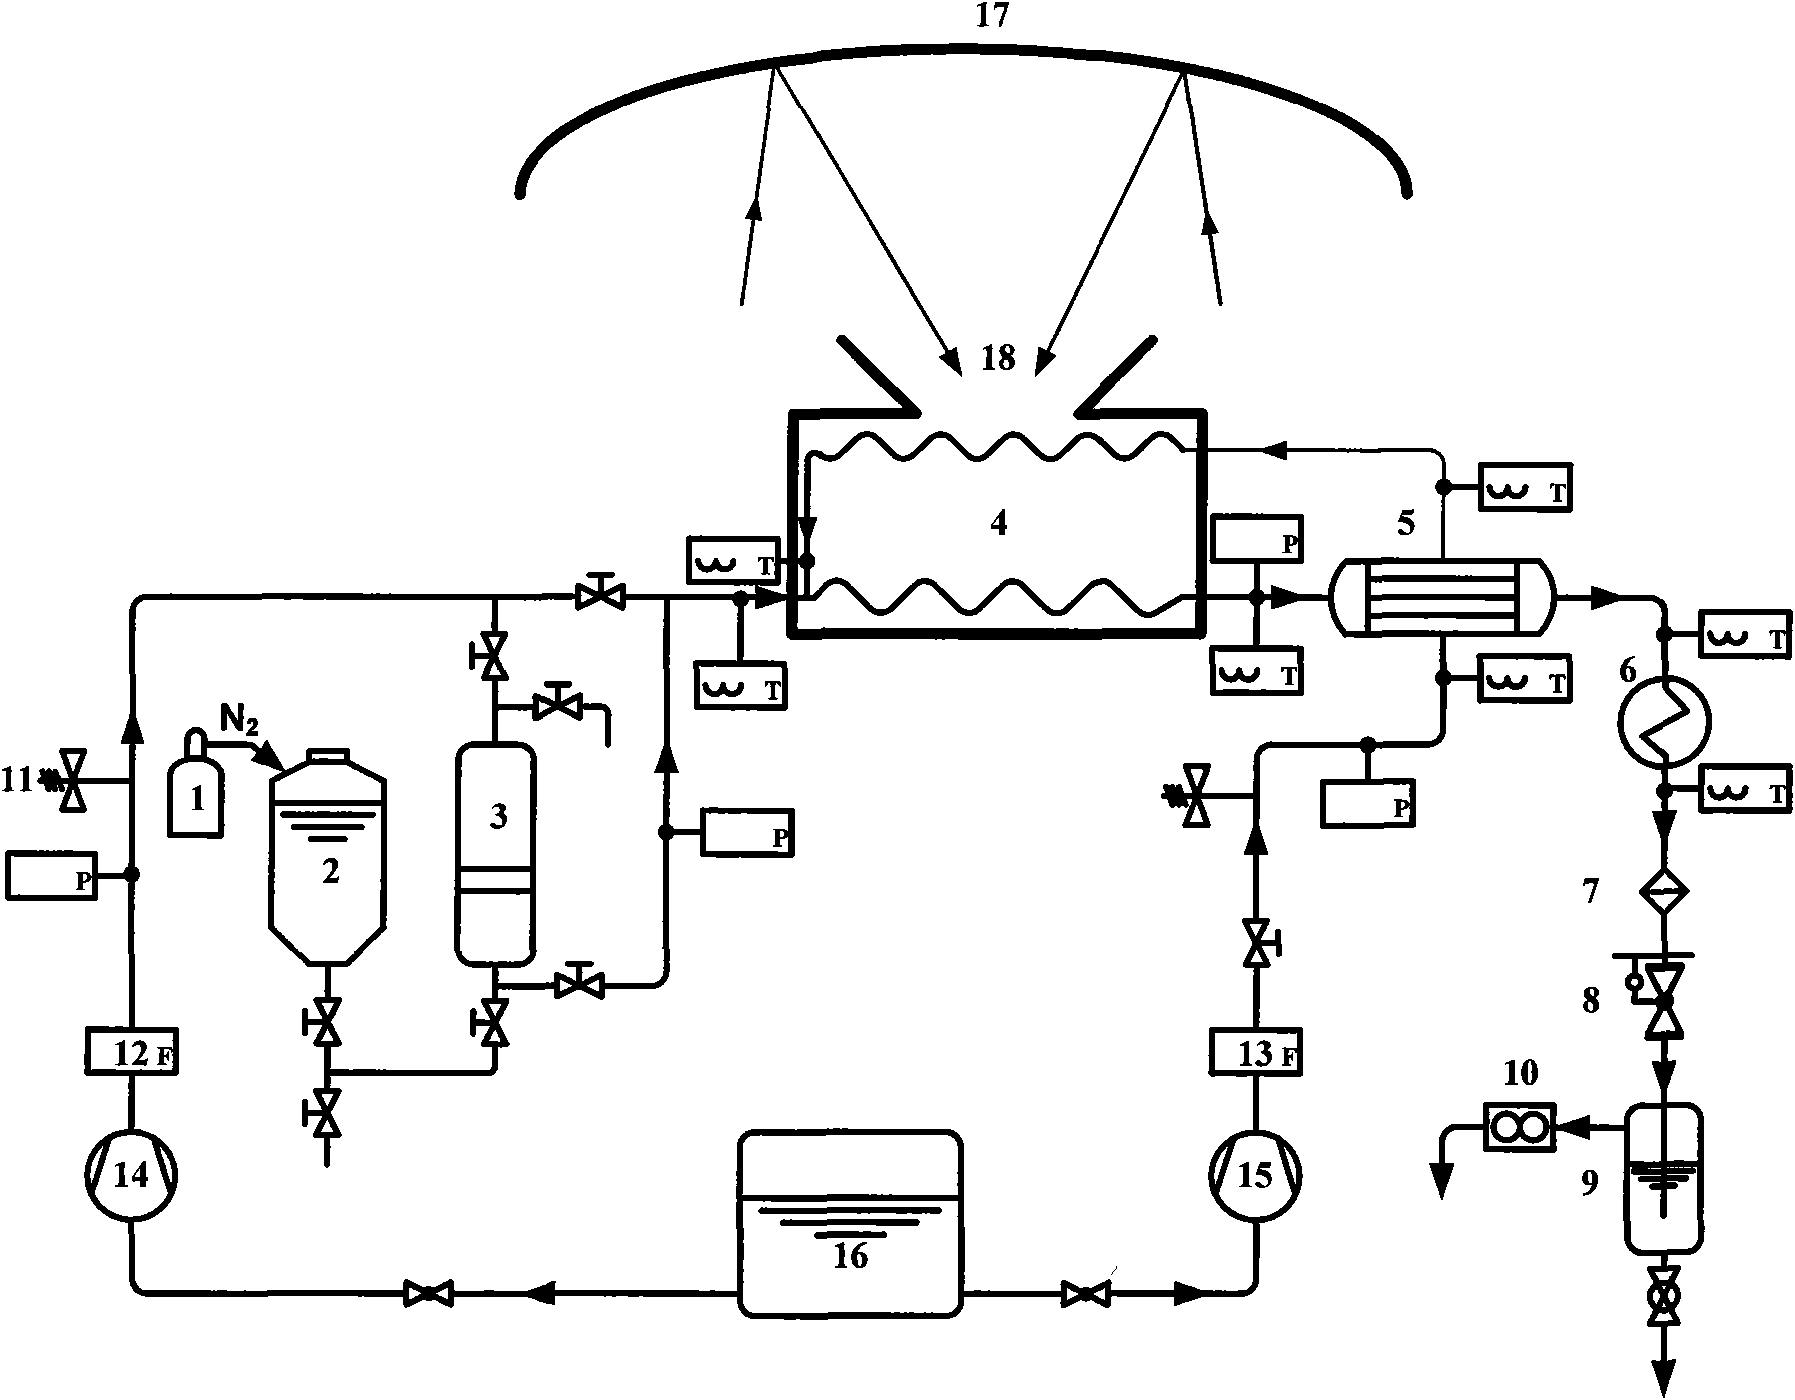 Biomass supercritical water gasification hydrogen production system and method thermally driven by focusing solar energy